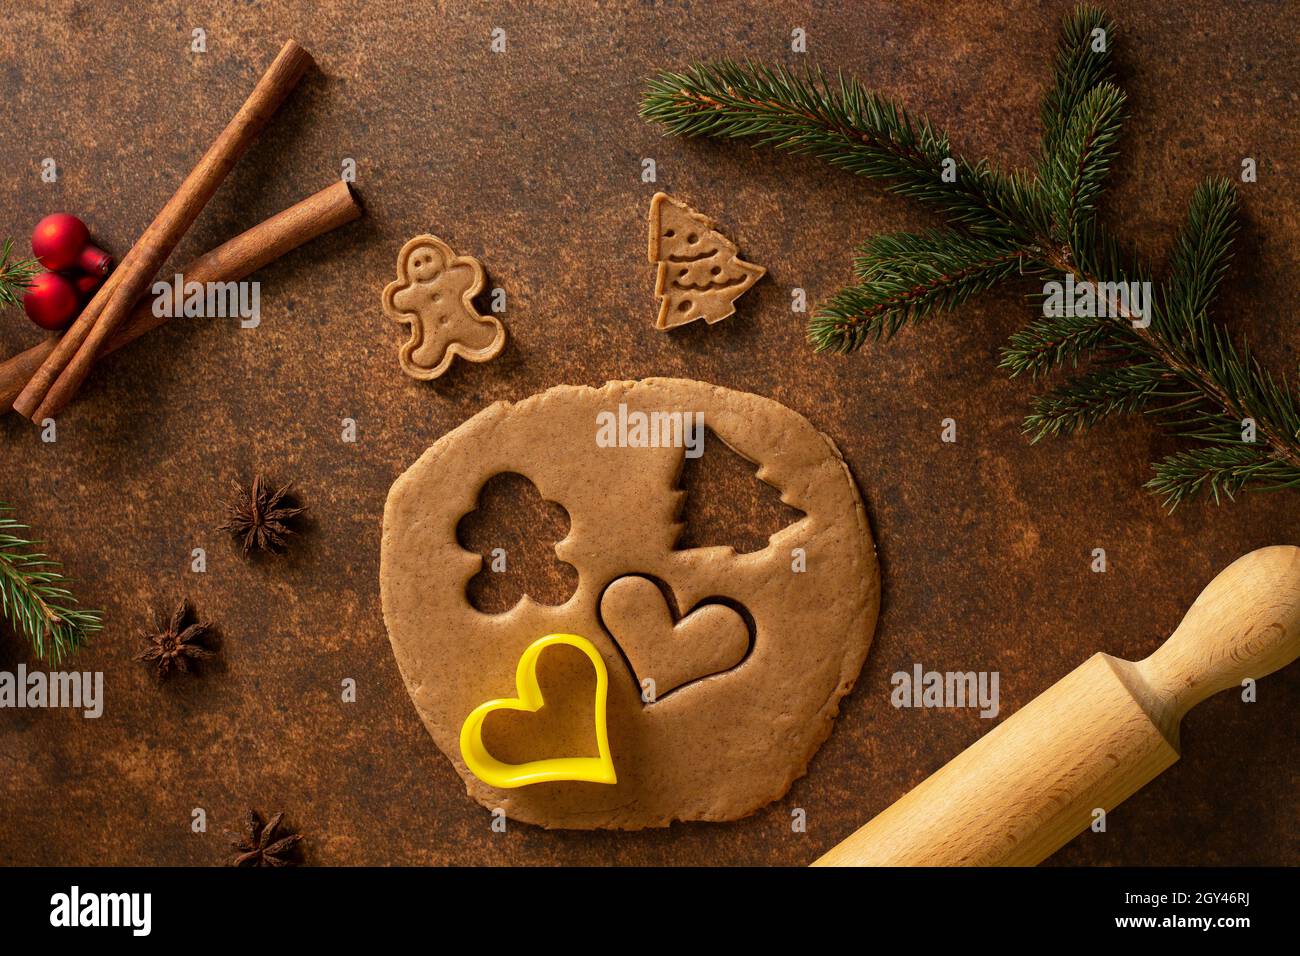 Gingerbread dough, rolled out. A gingerbread man, a Christmas tree cookie, a rolling pin, cinnamon quills, star anise fruits, Christmas tree ornaments Stock Photo